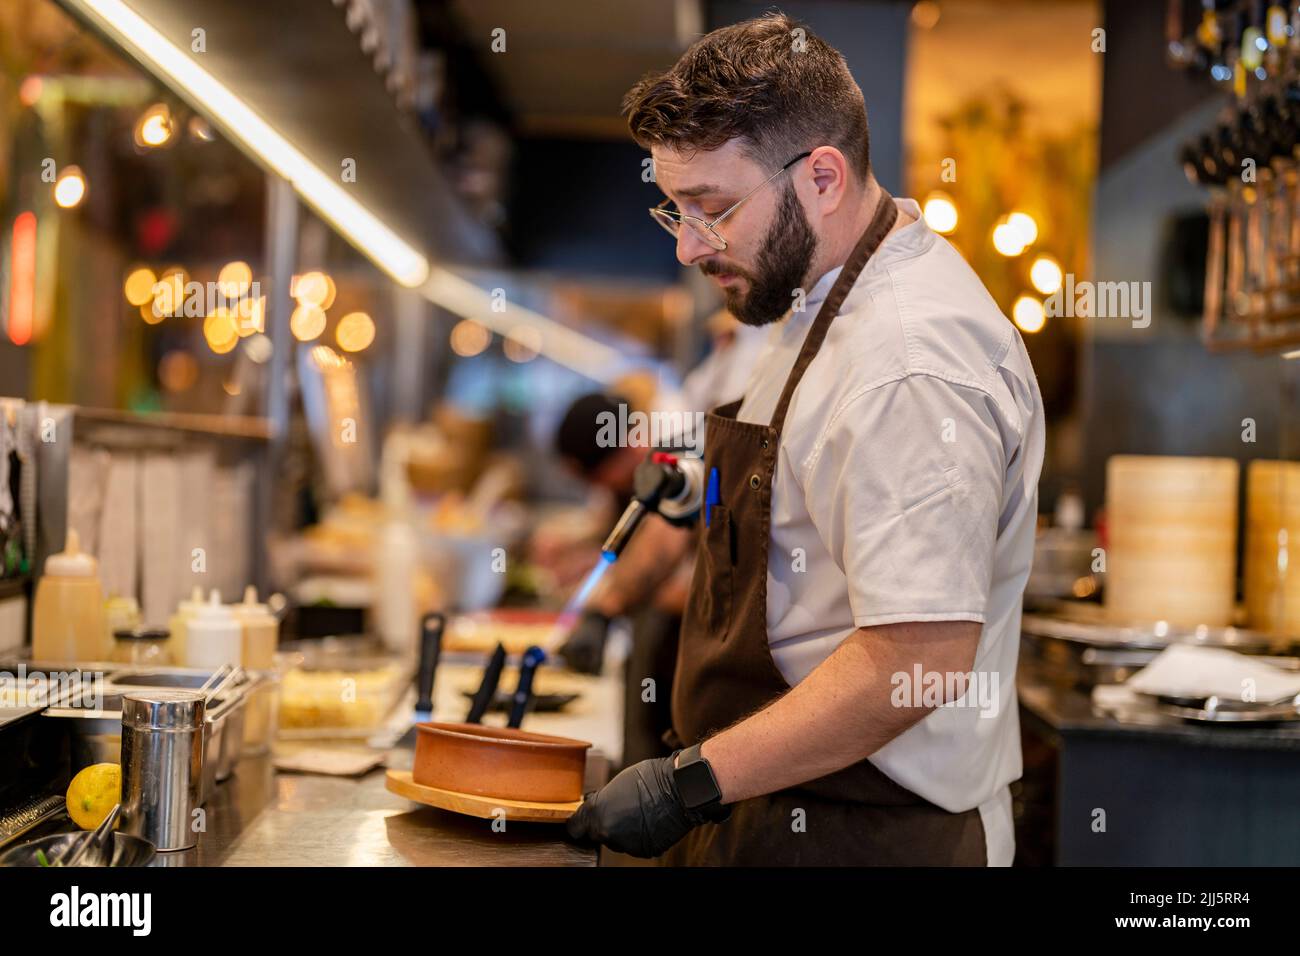 Chef using flaming torch standing at restaurant kitchen Stock Photo